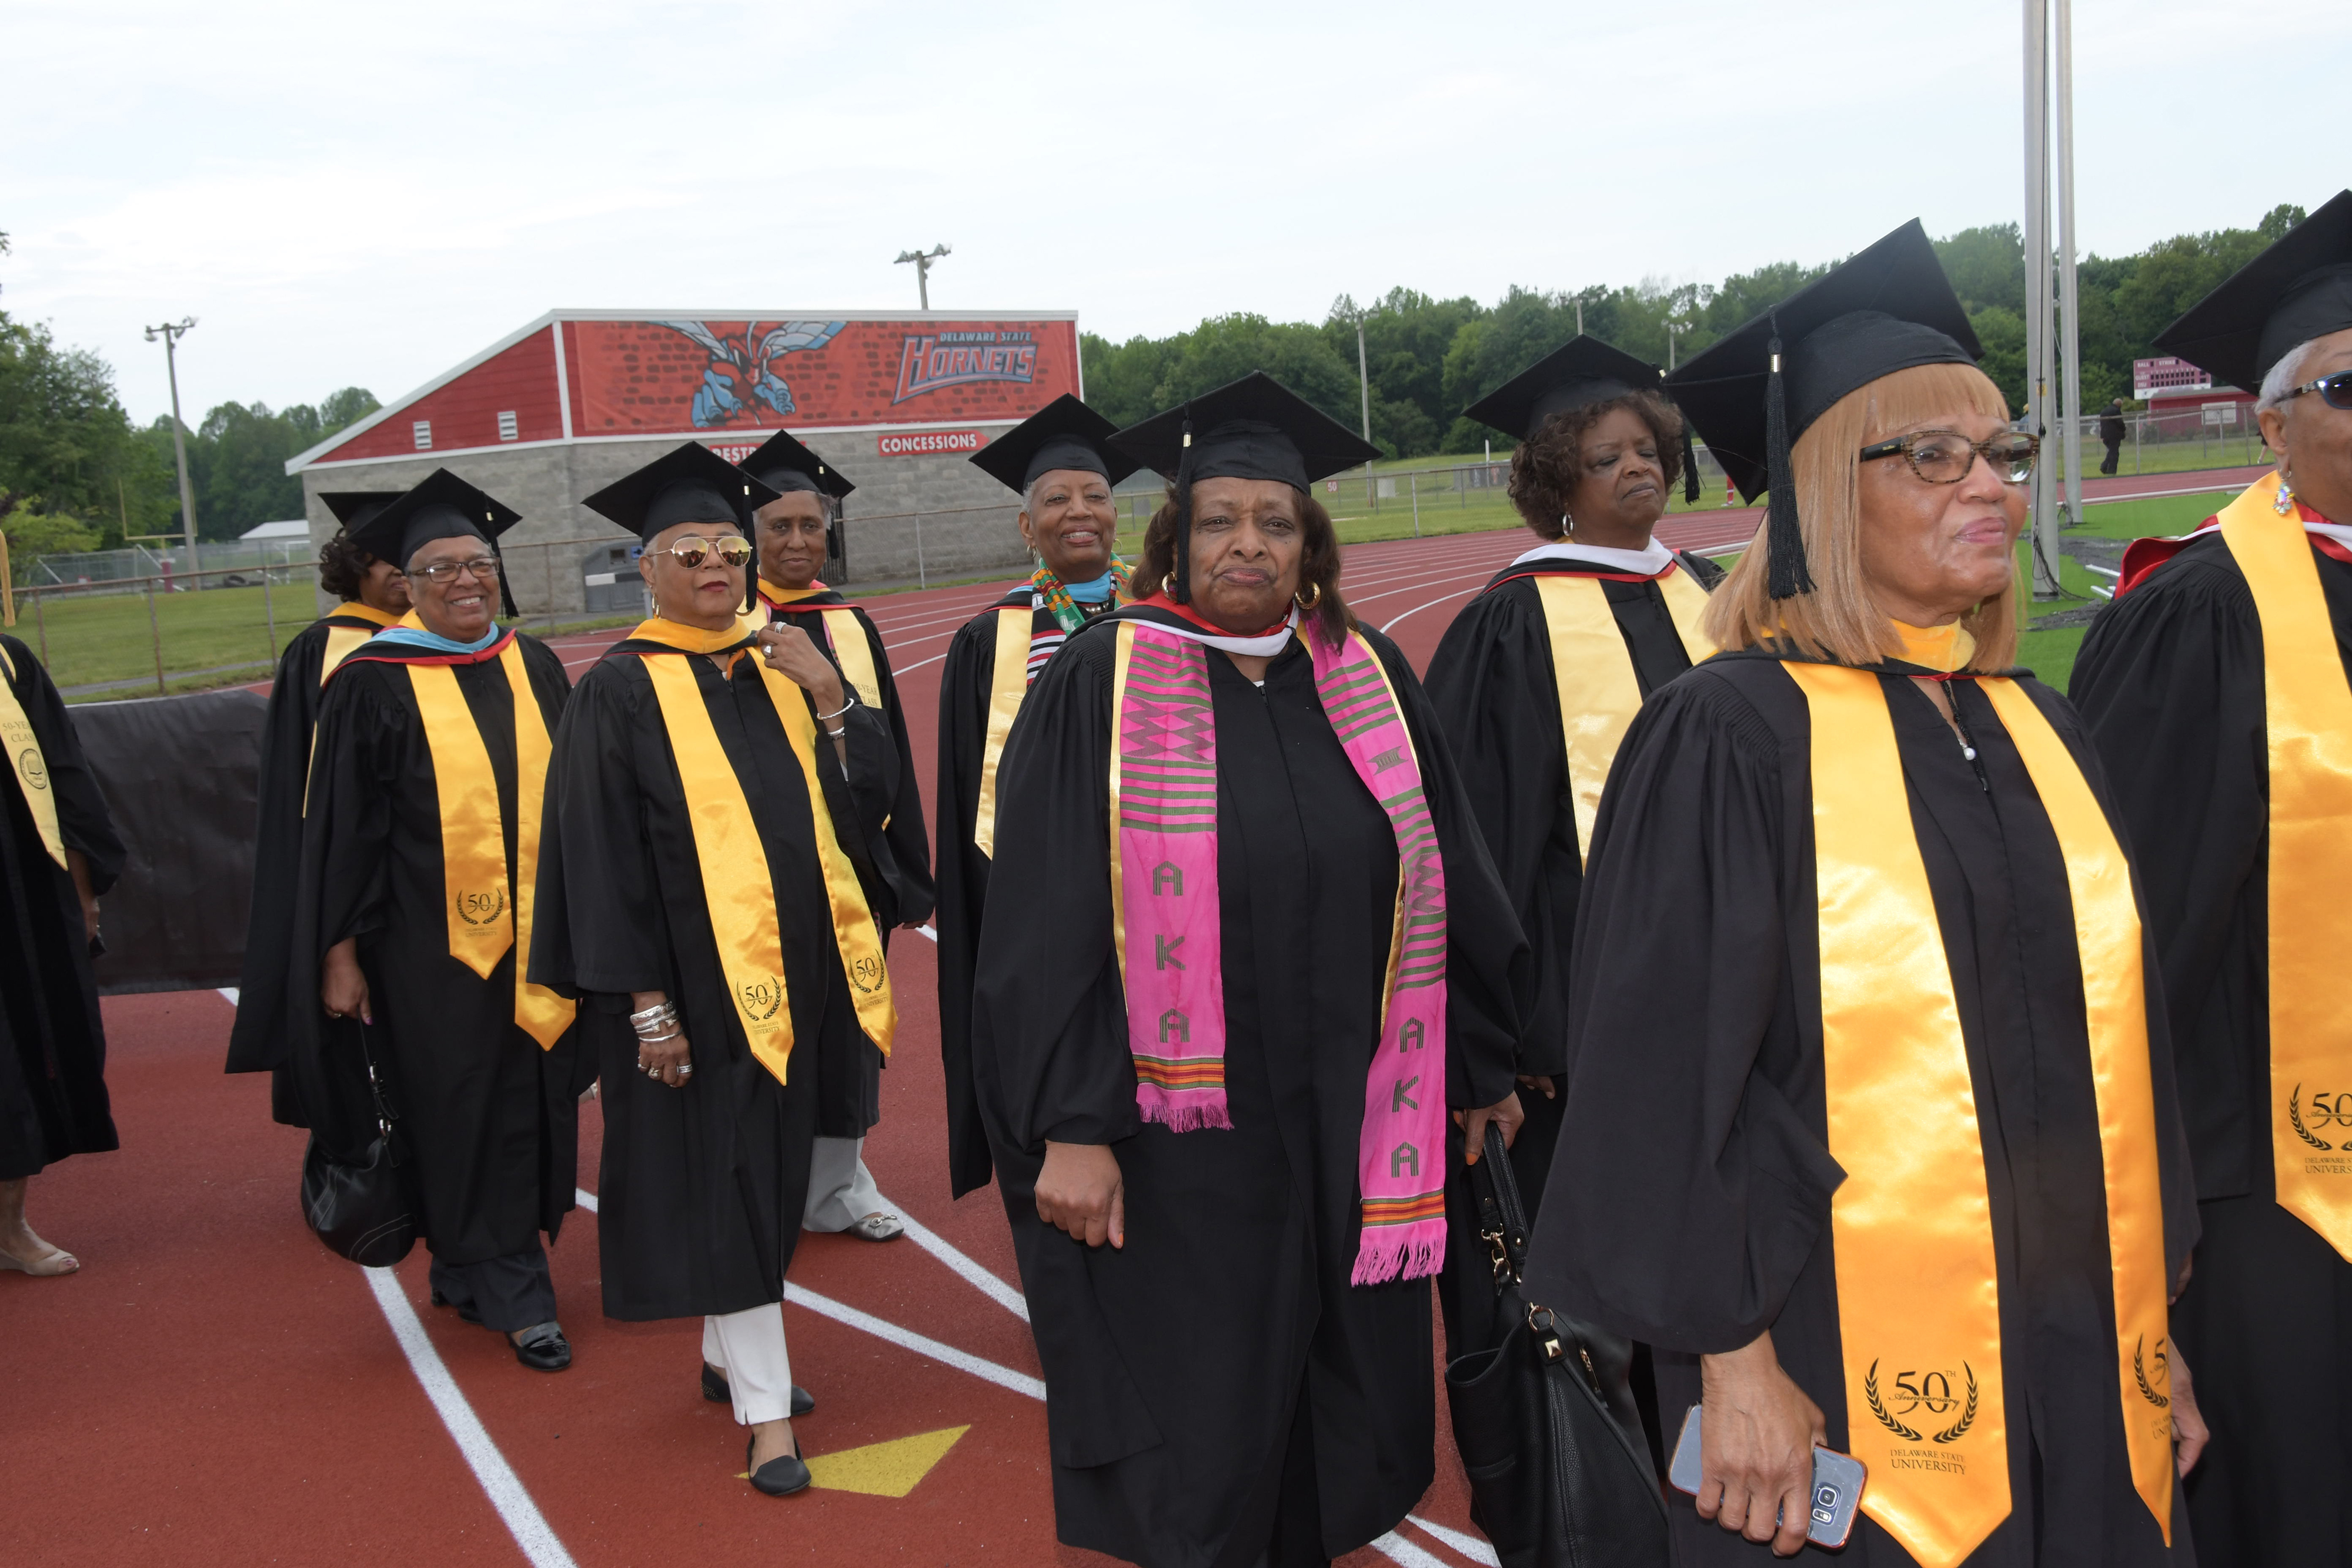 The Class of 1969 march out onto Alumni Stadium to take part in the May 11 Commencement Ceremony.